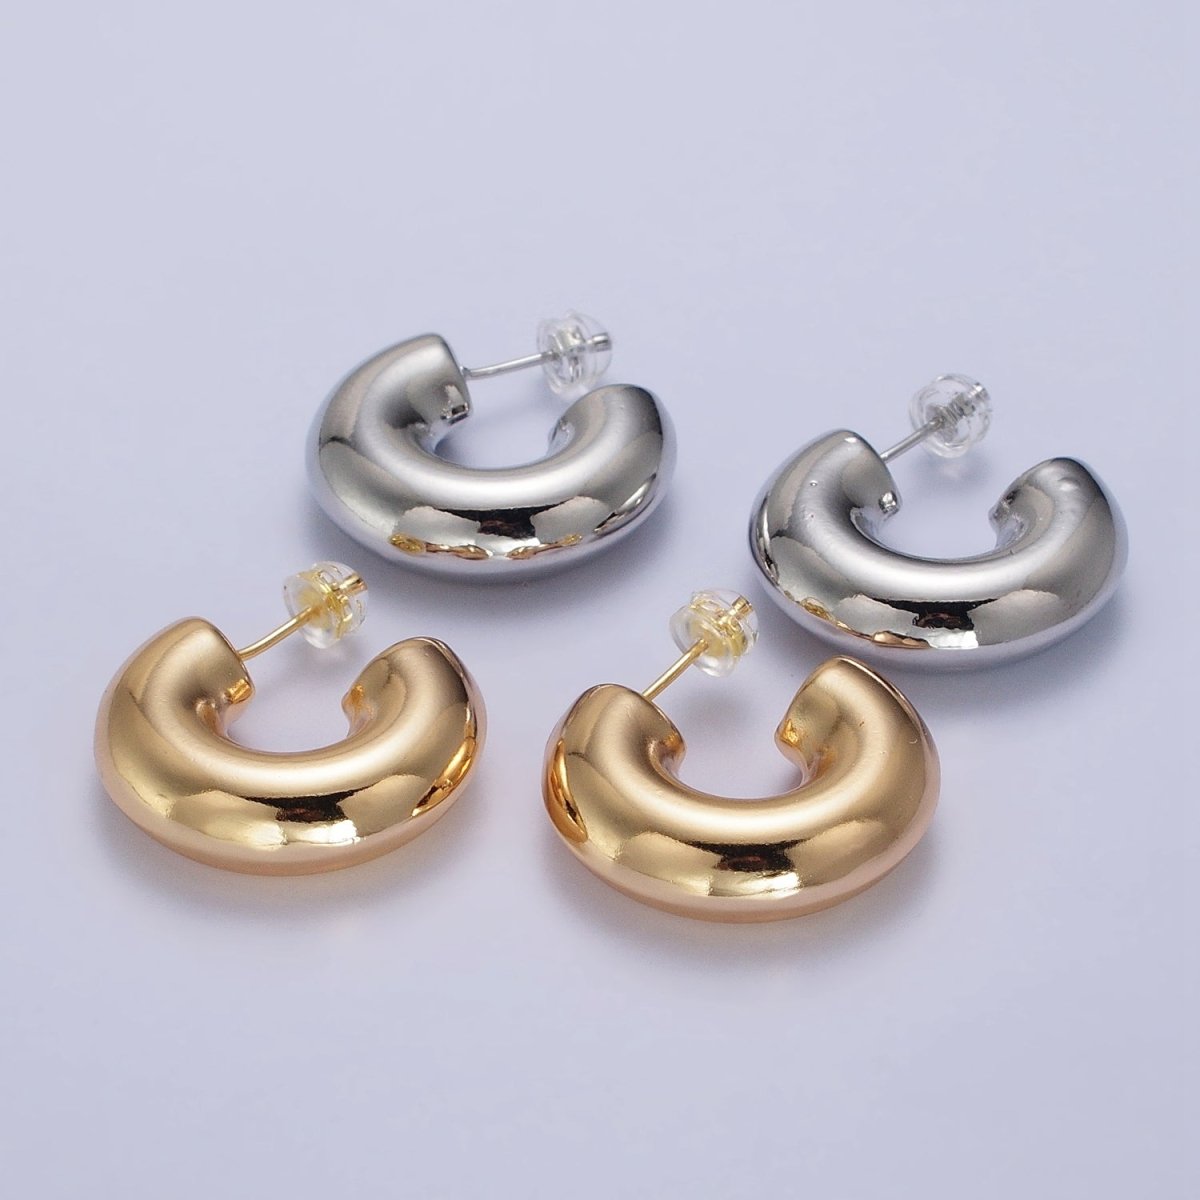 OS Gold Filled Edged Wide Chubby Geometric C-Shaped Hoop Earrings in Gold & Silver | AB342 AB343 - DLUXCA